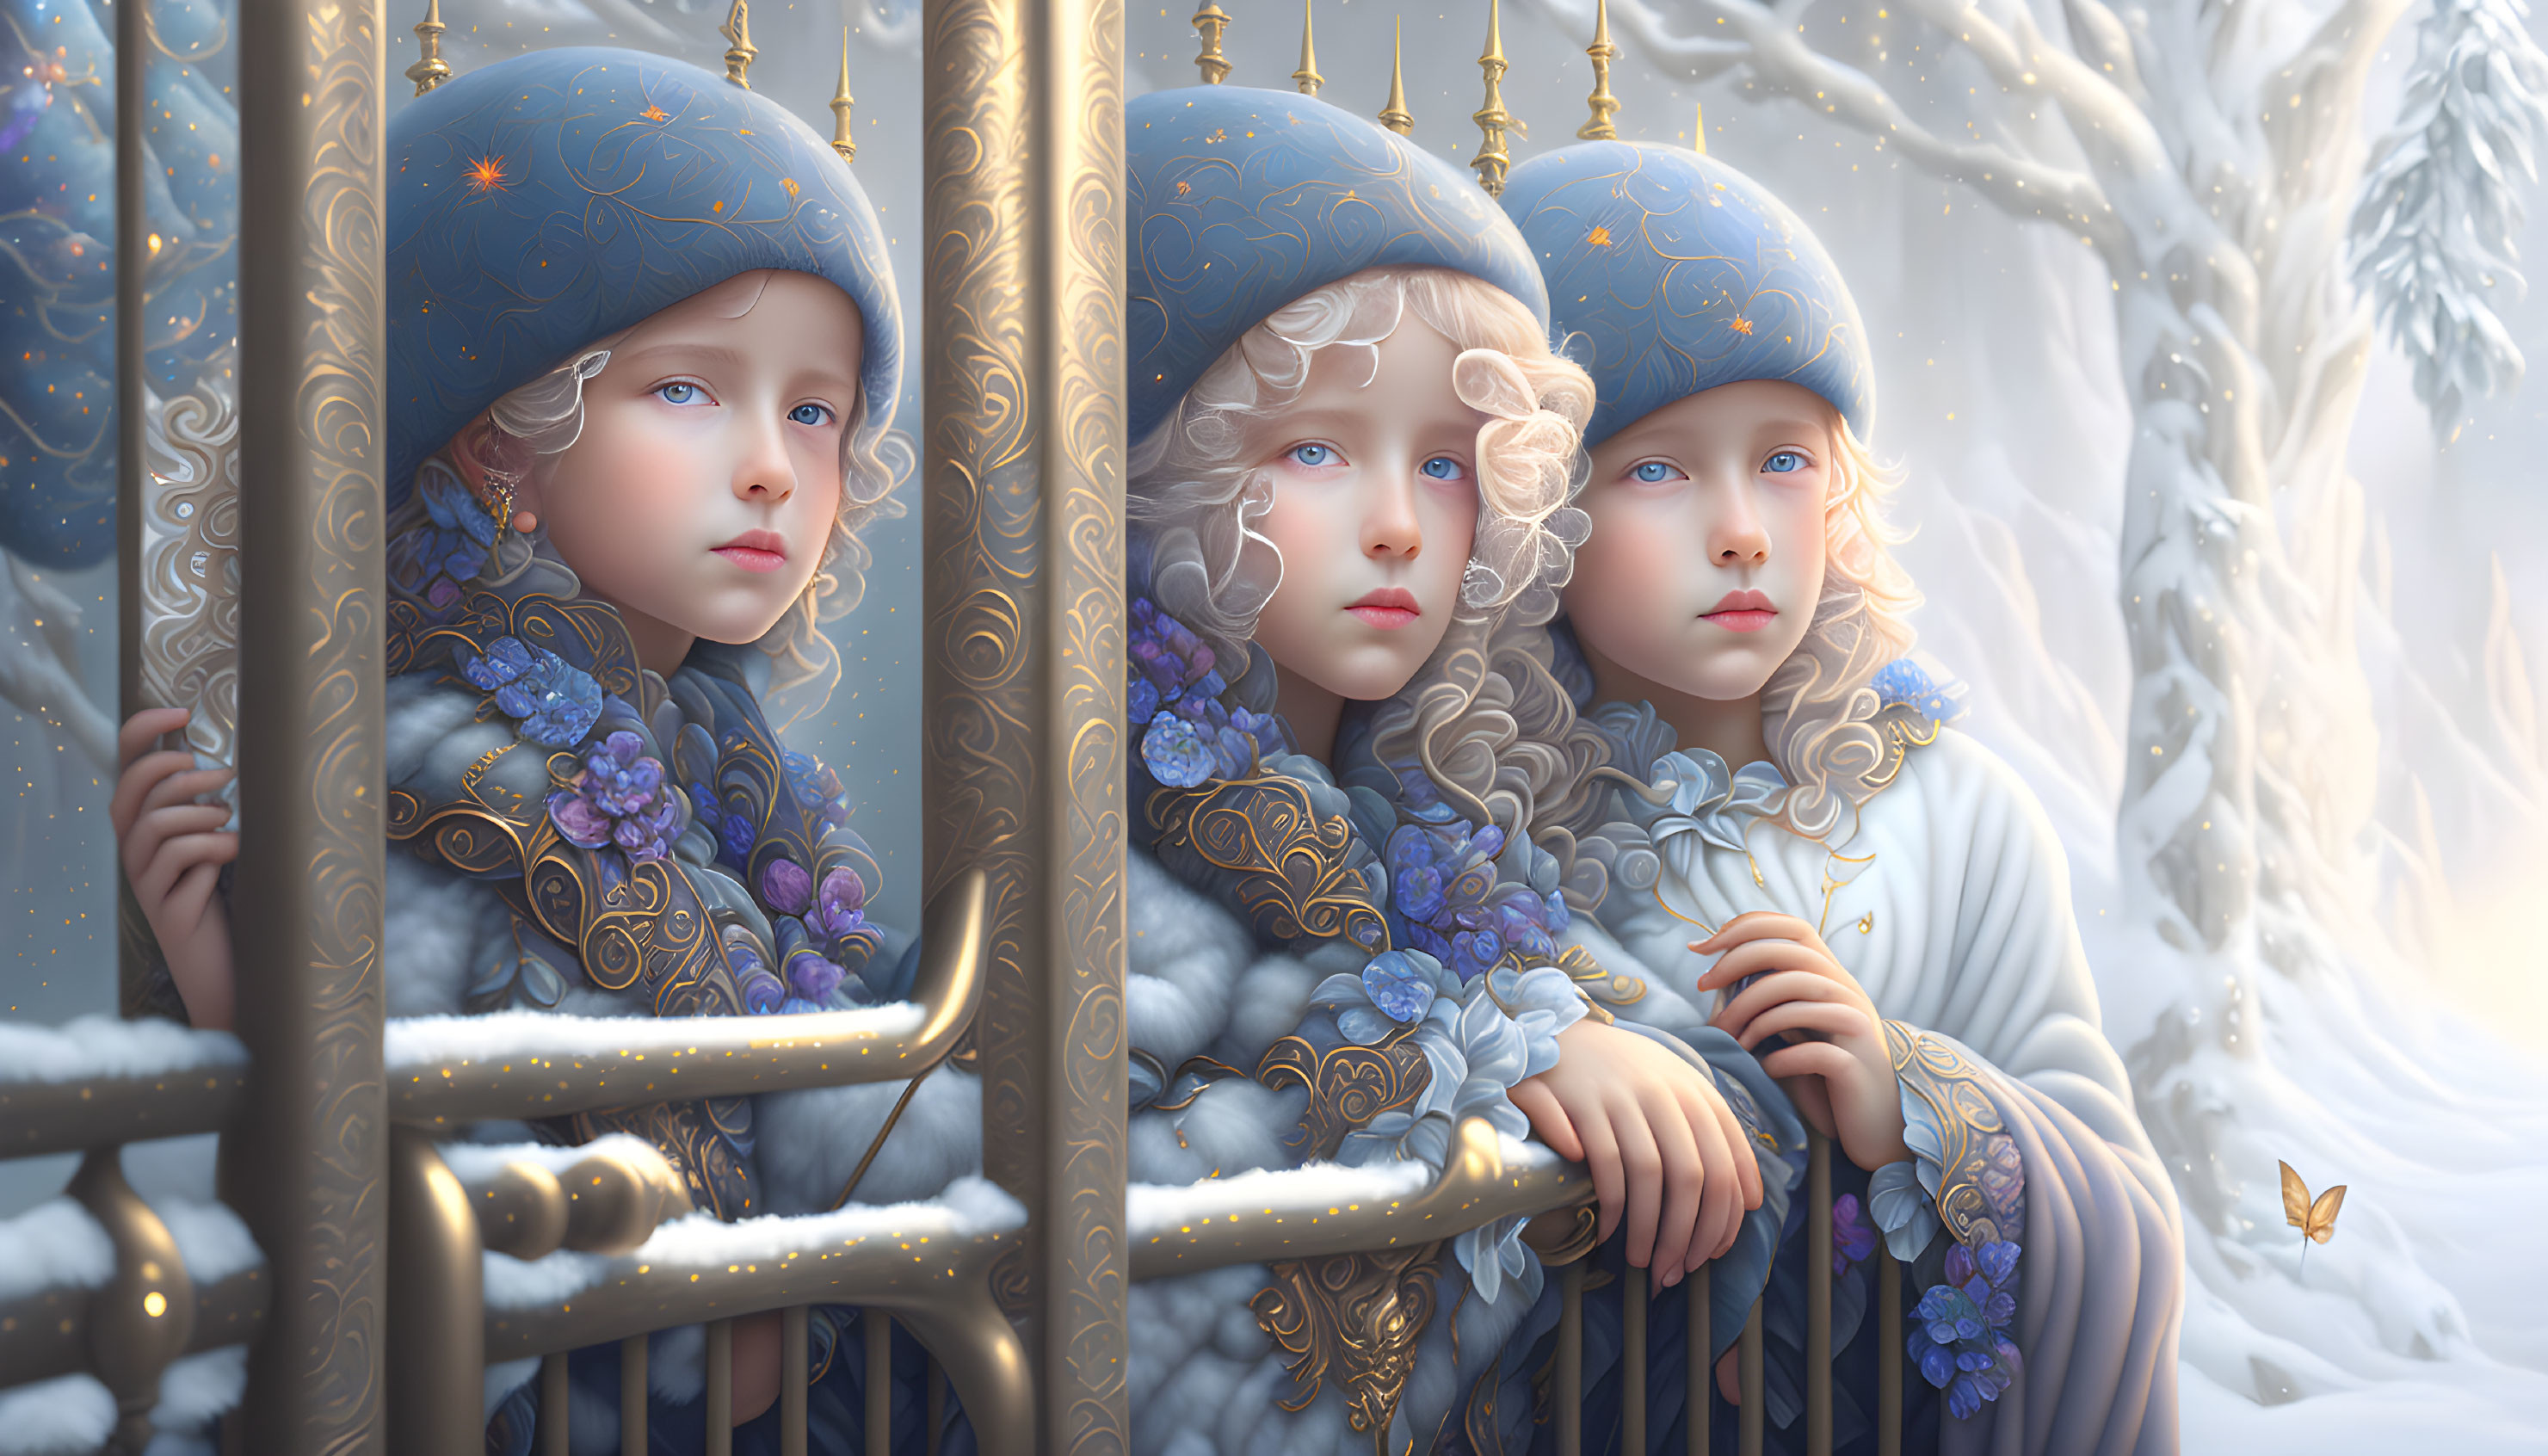 Ethereal children in blue and gold attire at golden gate in snowy forest